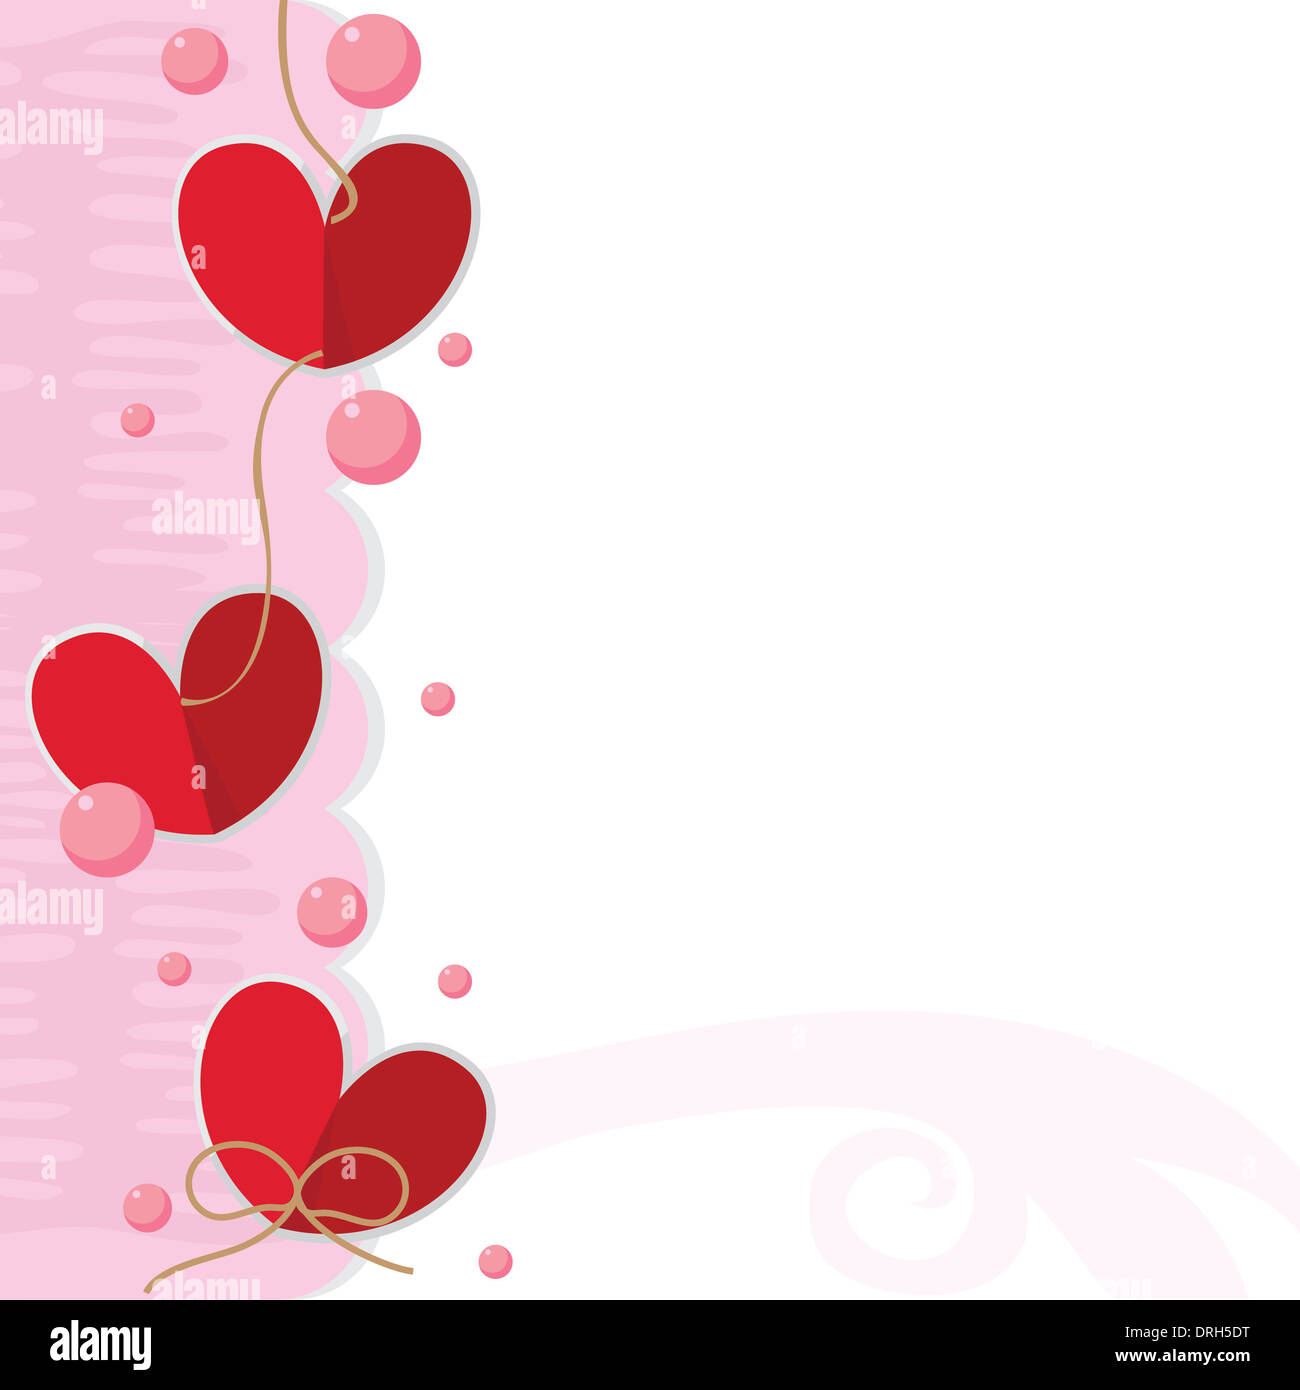 love background for wedding and valentine card designs Stock Photo - Alamy